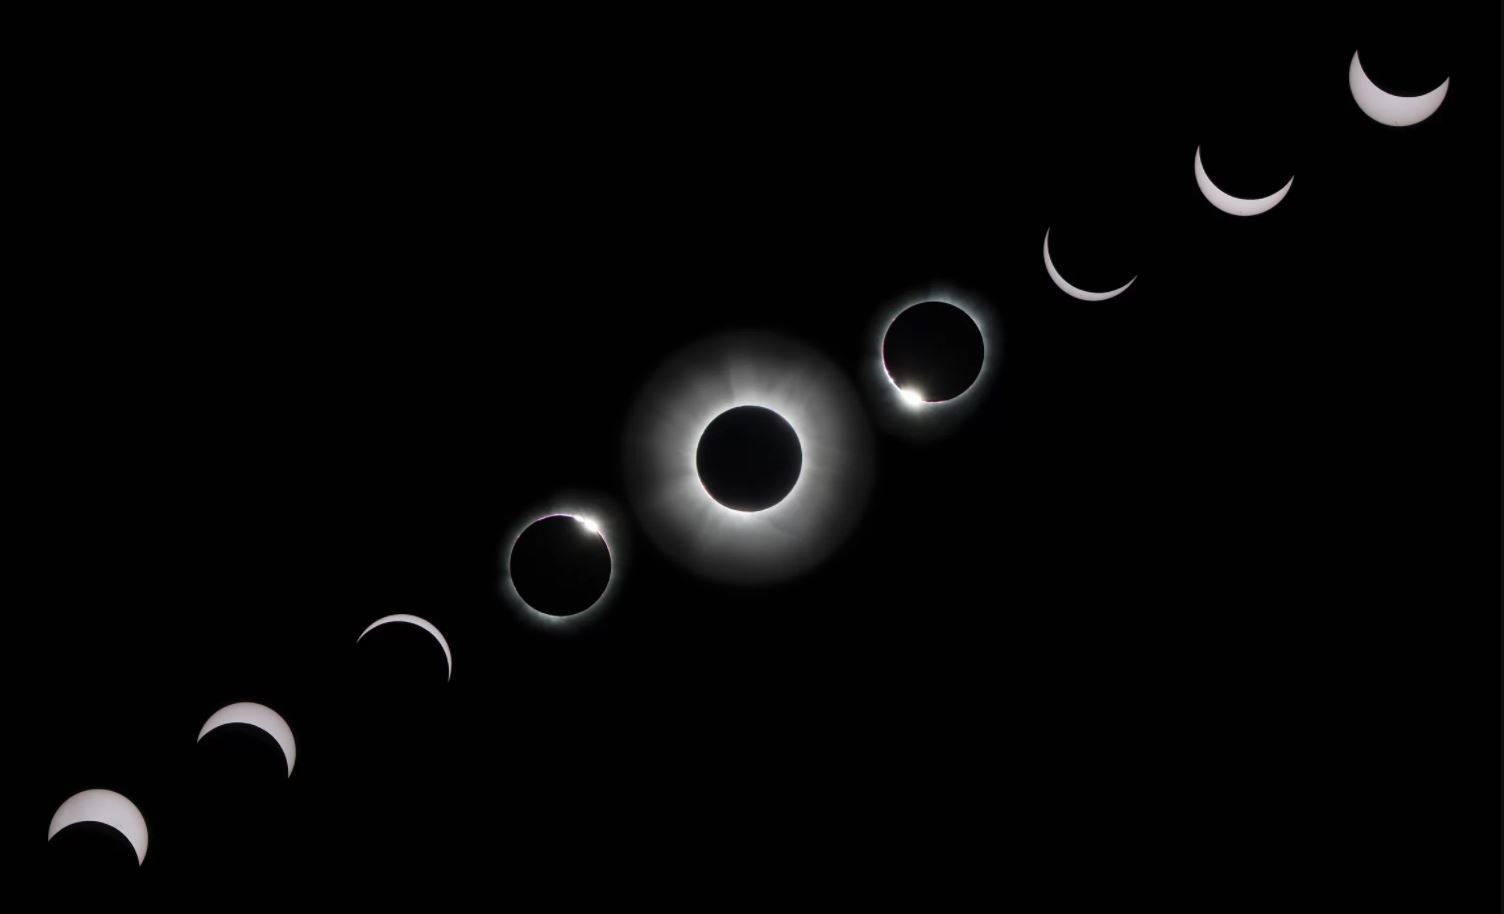 The Chilean government on Thursday announced special social-distancing regulations for Christmas, New Year and the December 14th total eclipse of the sun, in a bid to avoid mass gatherings amid the COVID-19 pandemic.